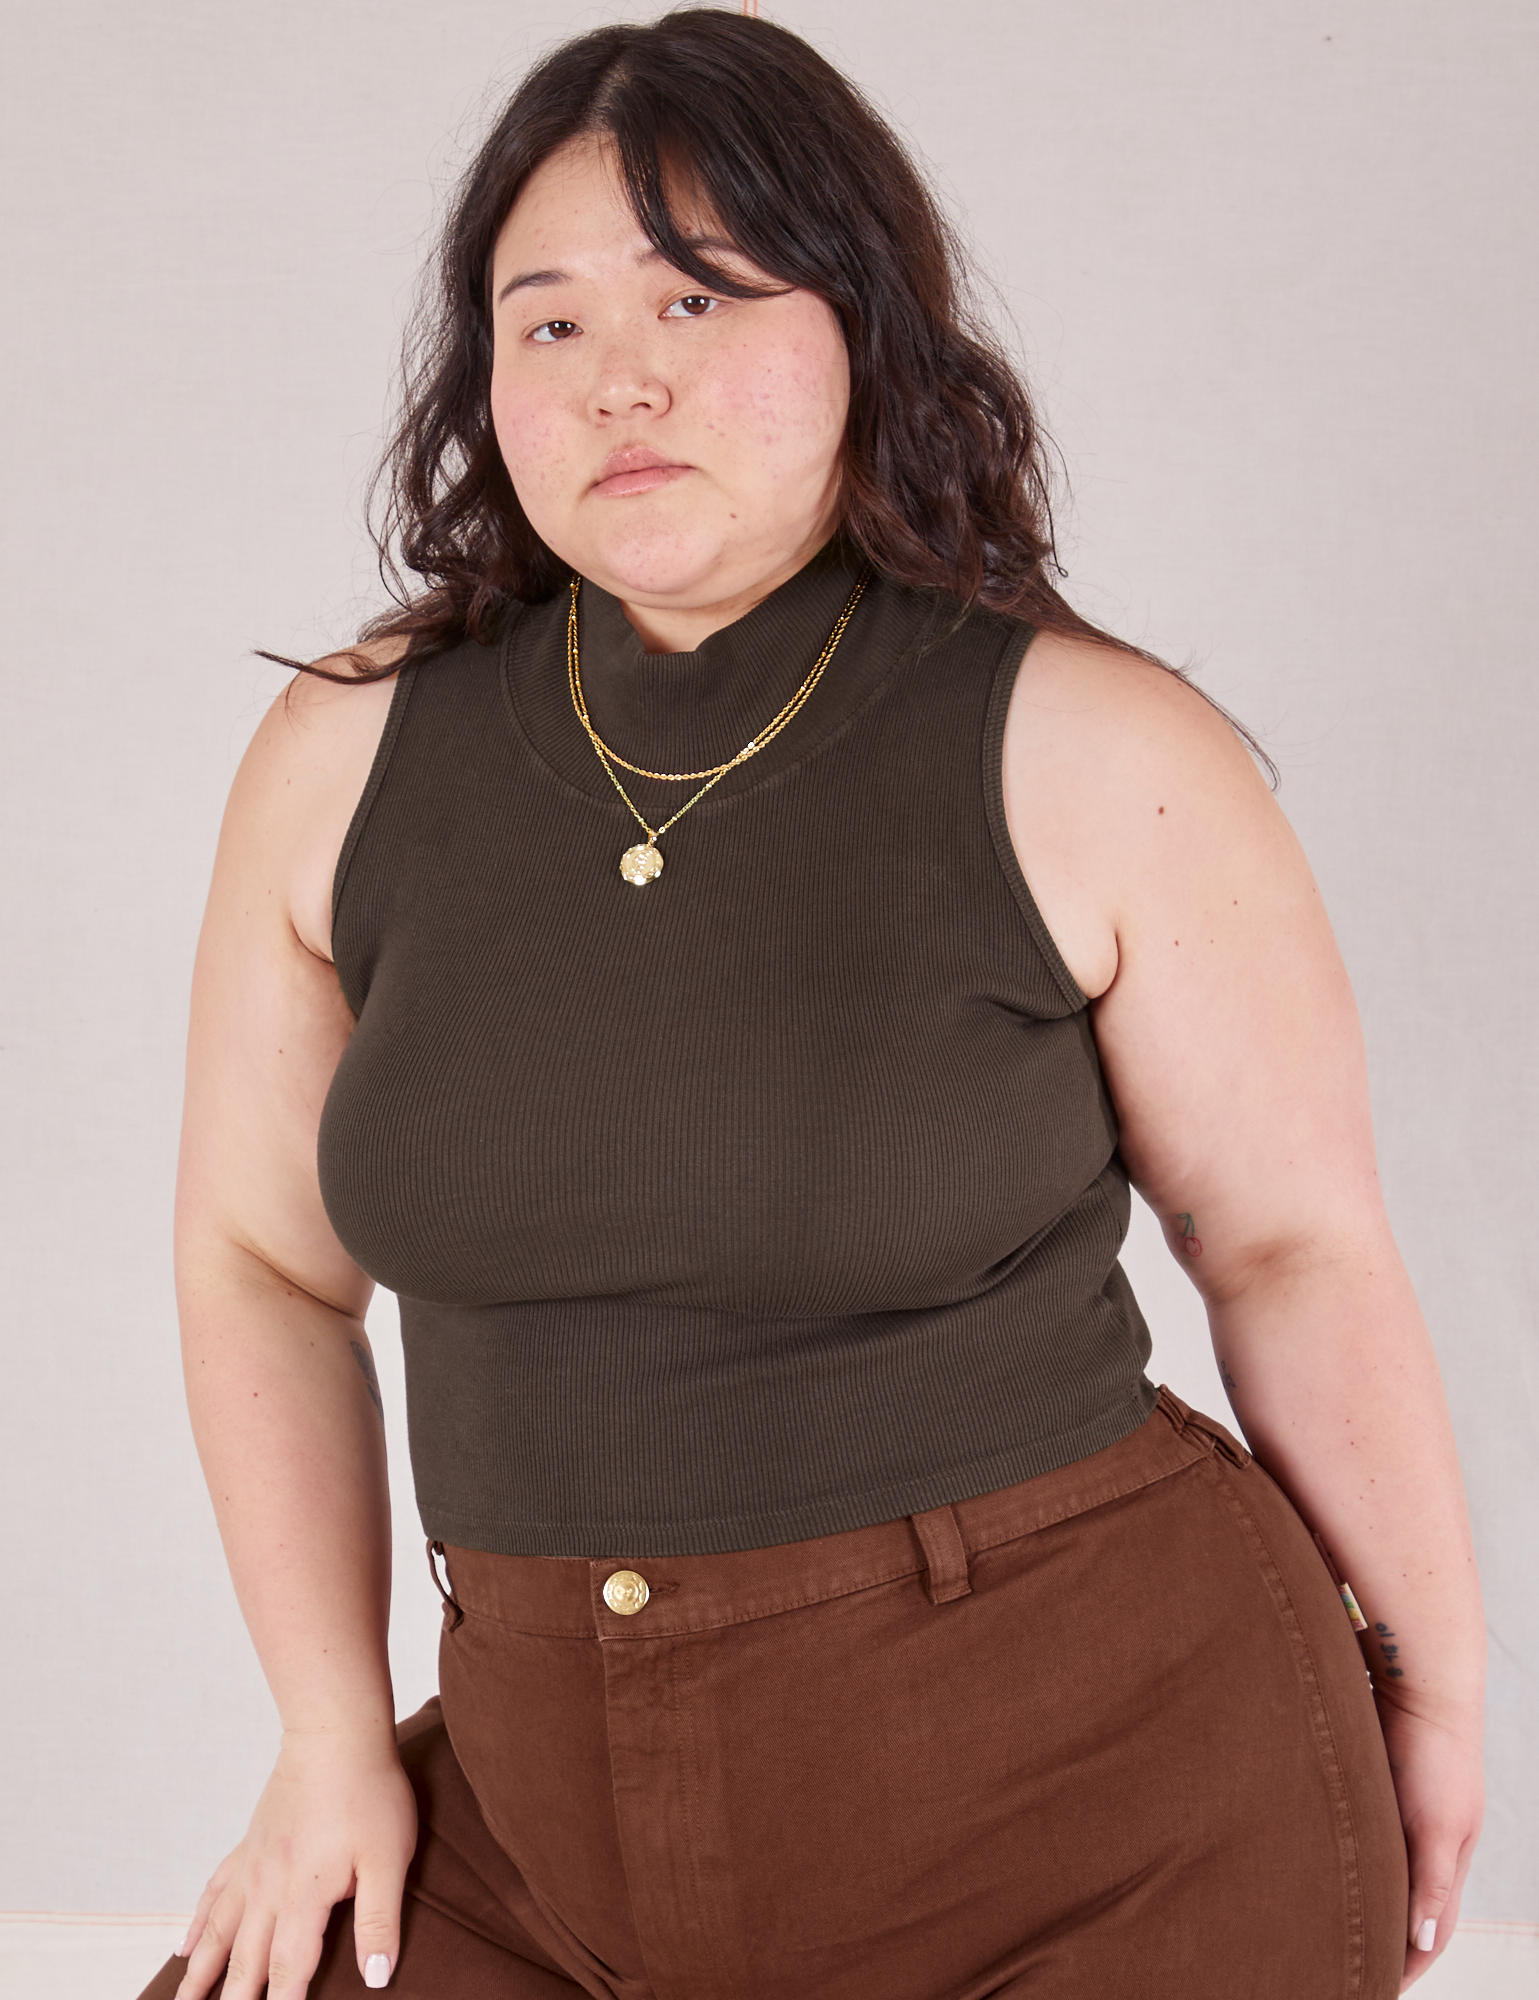 Ashley is 5&#39;7&quot; and wearing L Sleeveless Essential Turtleneck in Espresso Brown